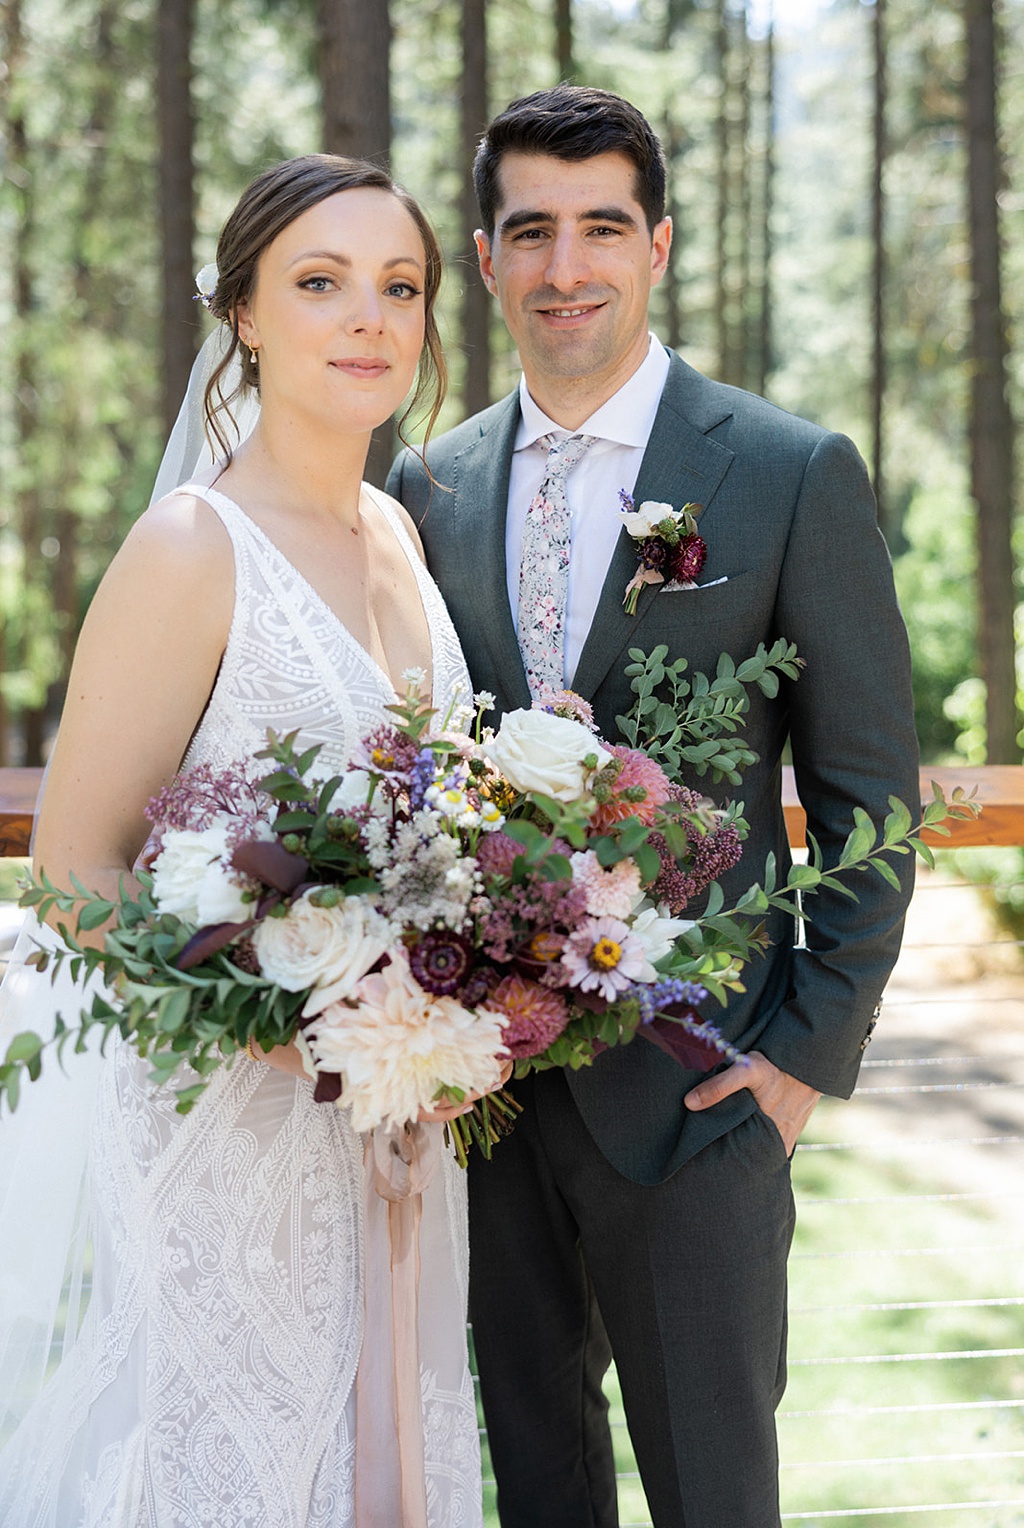 The bride and groom pose with the bridal bouquet at the ceremony